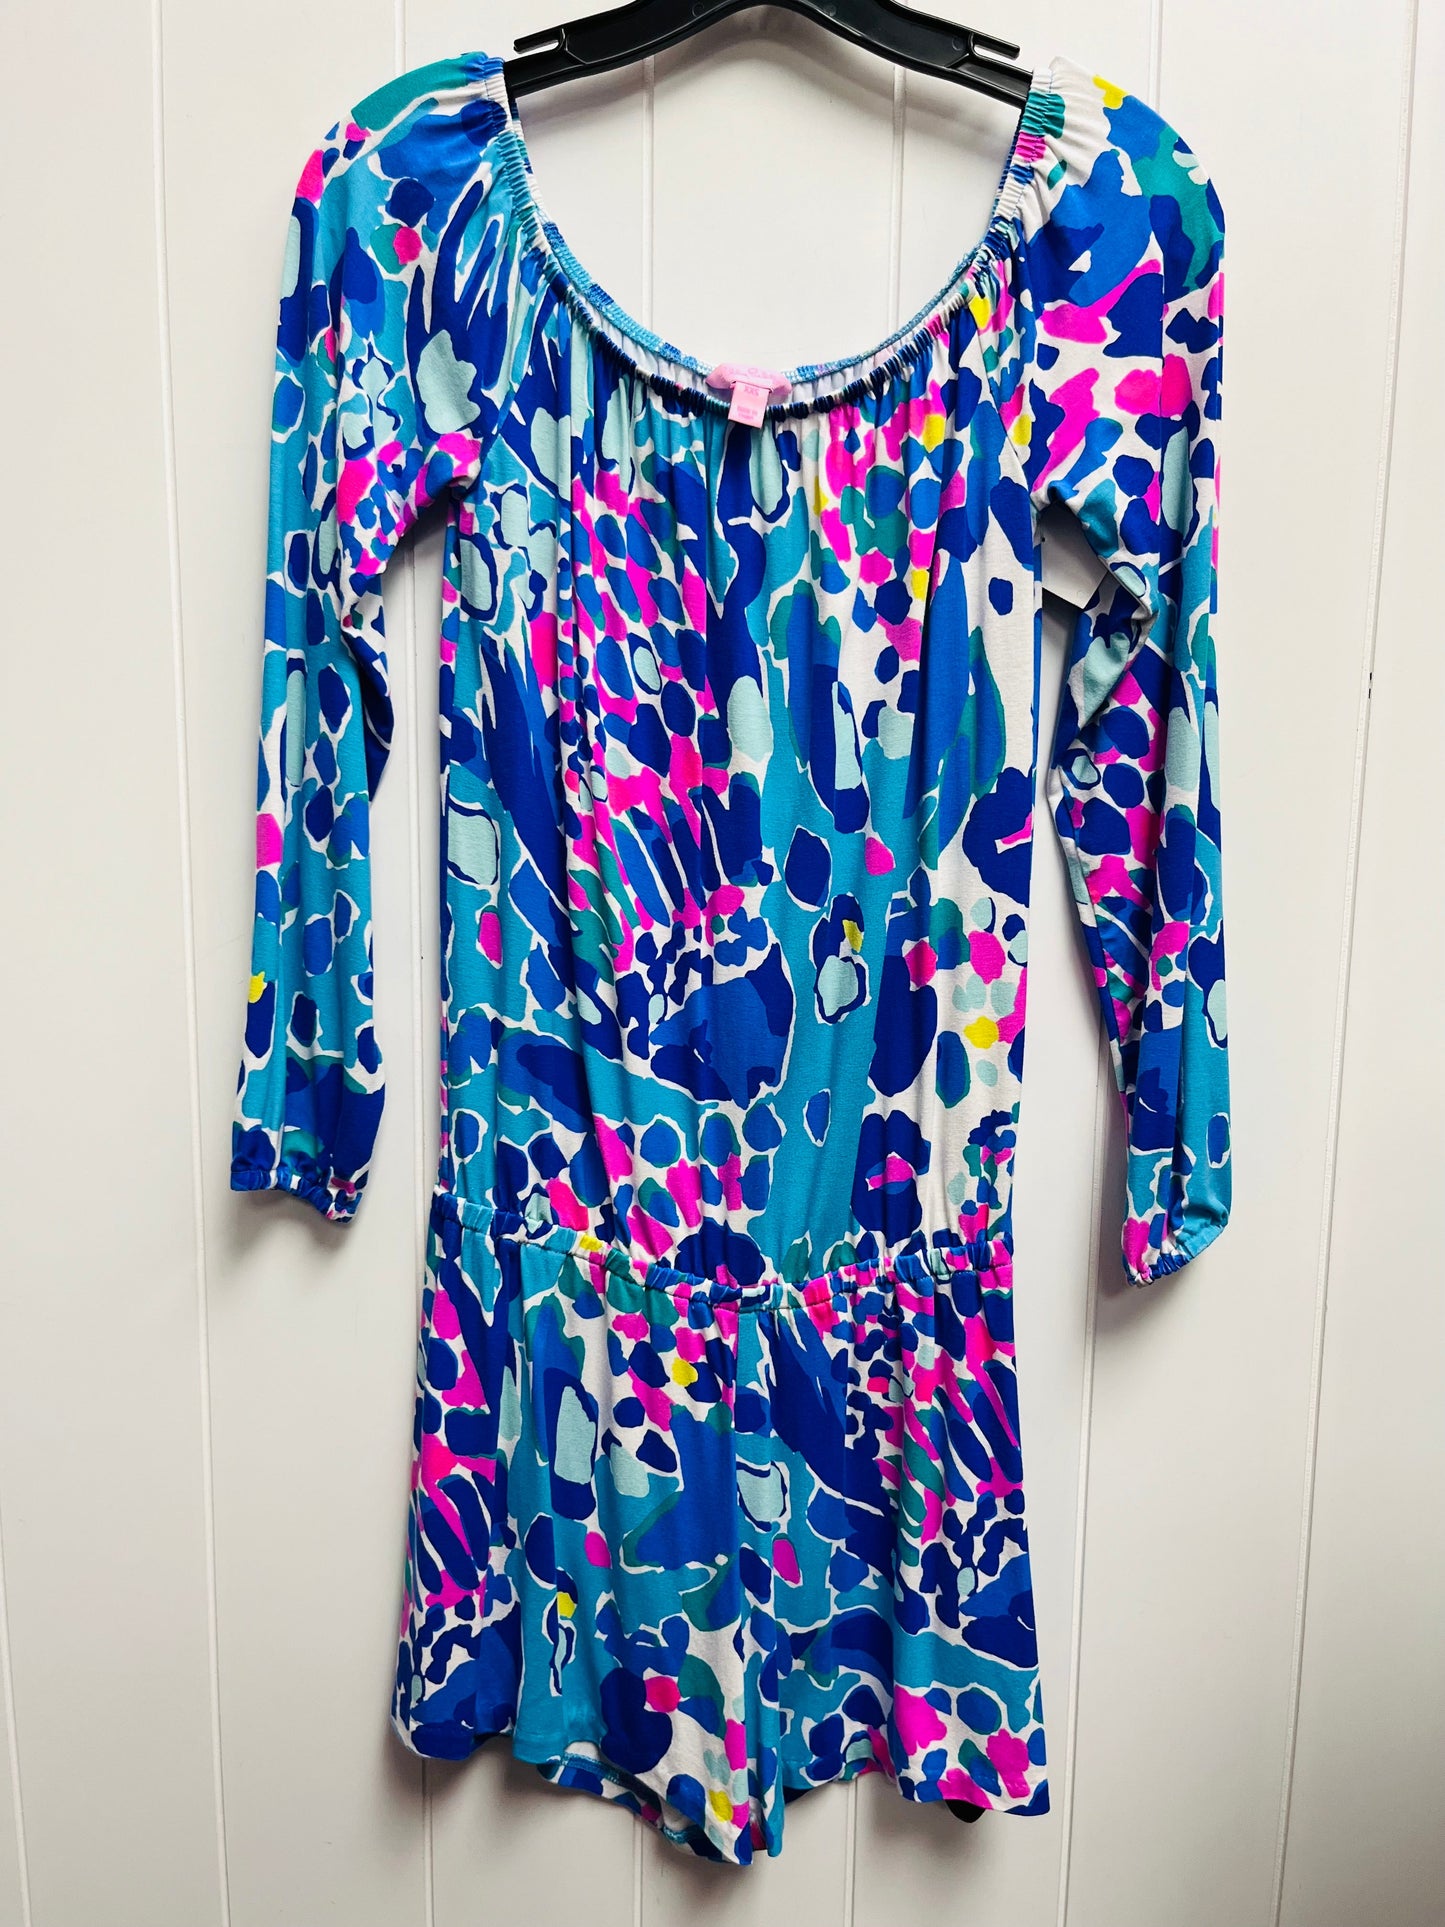 Blue & Pink Romper Lilly Pulitzer, Size Xxs